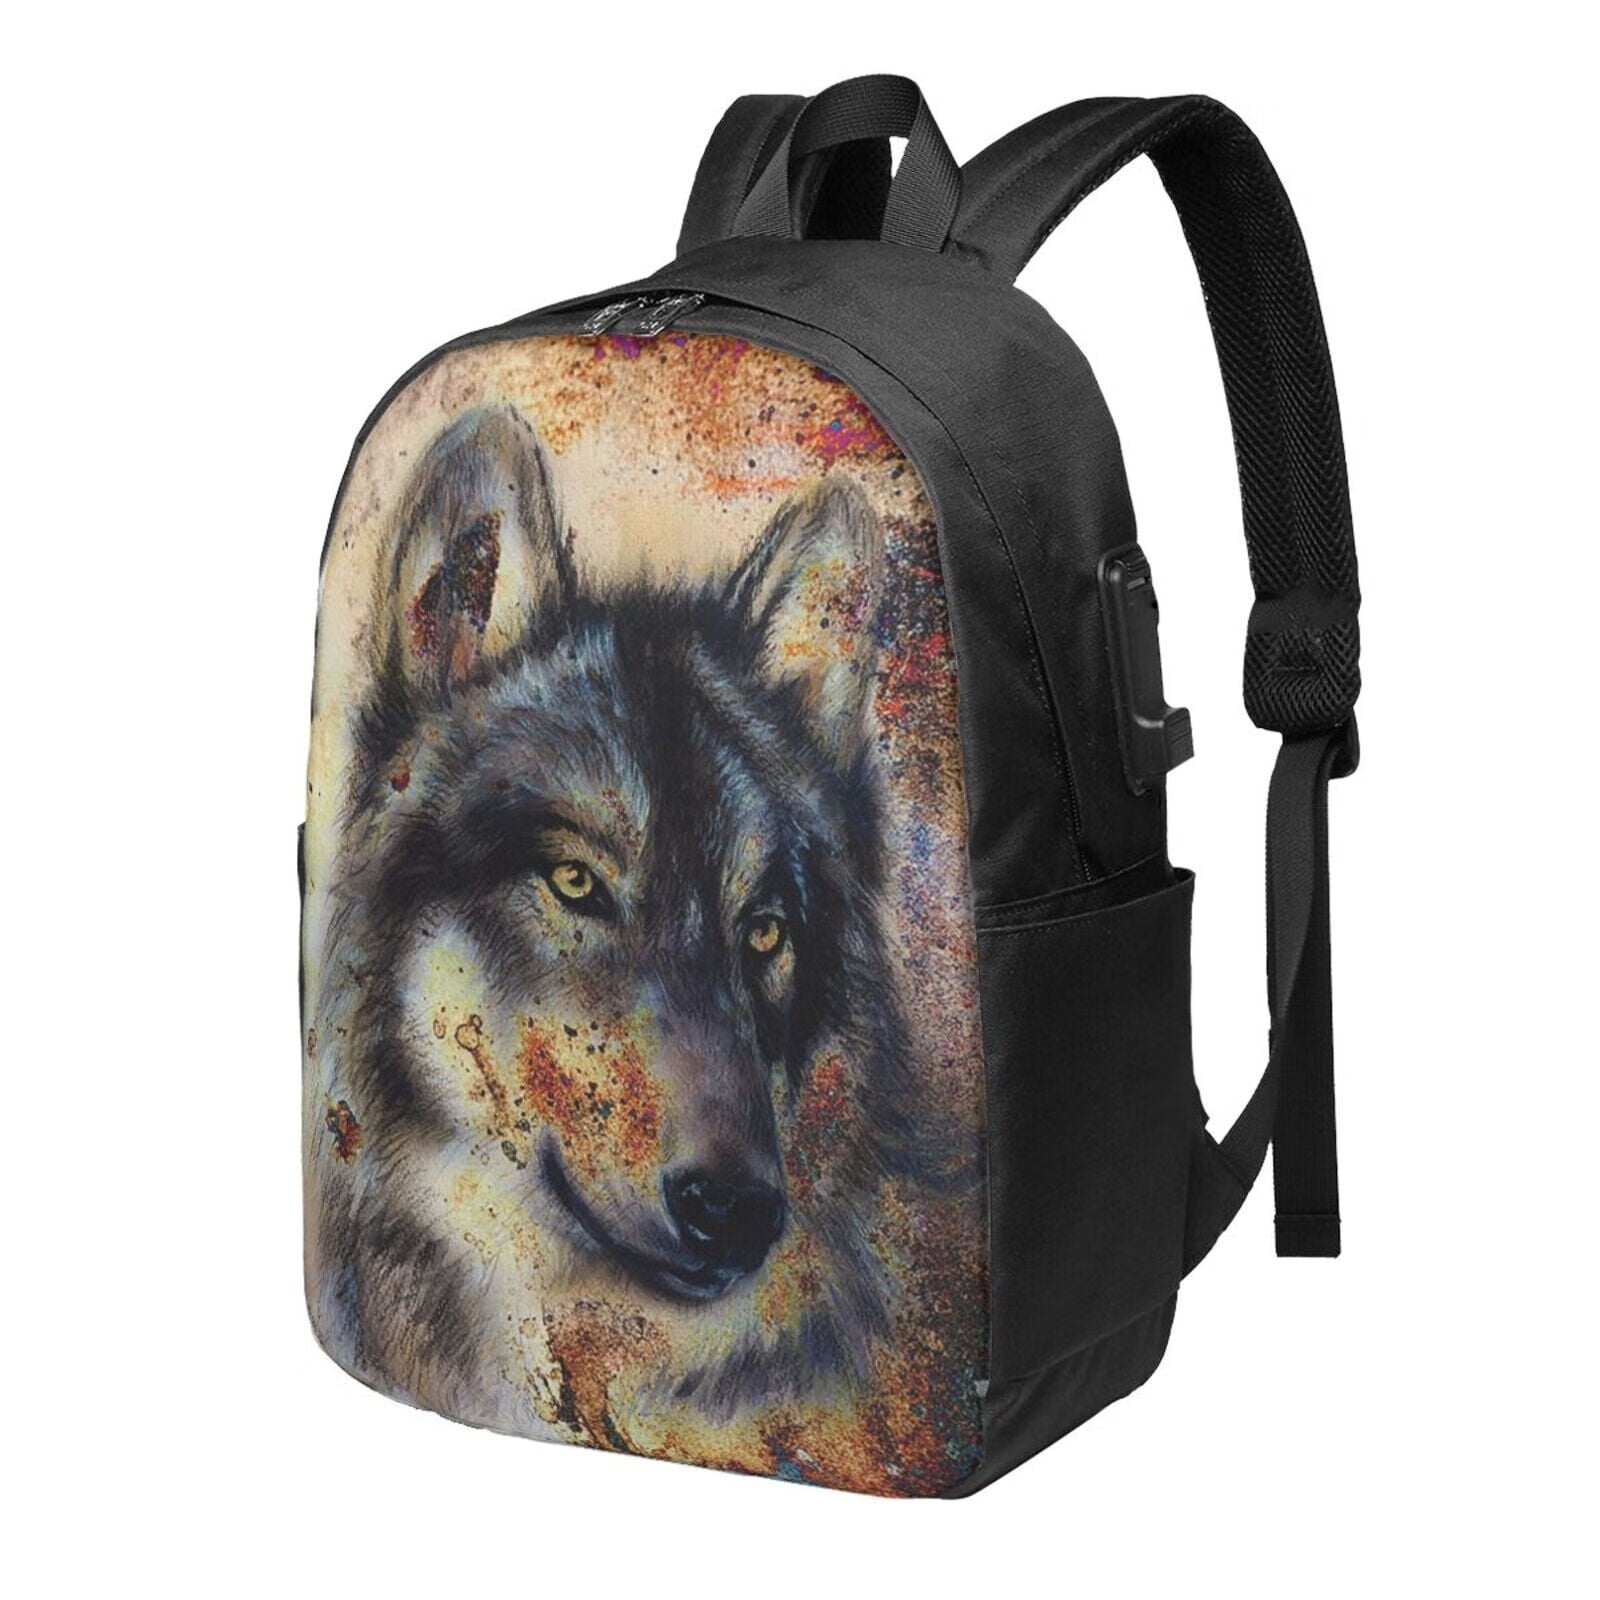 Amazon.com | GLUDEAR 12 Inch Funny Wolf Backpack with Side Pockets for Boys  for School, Travel, Hiking, Camping,Rainbow Lighting Wolf | Kids' Backpacks